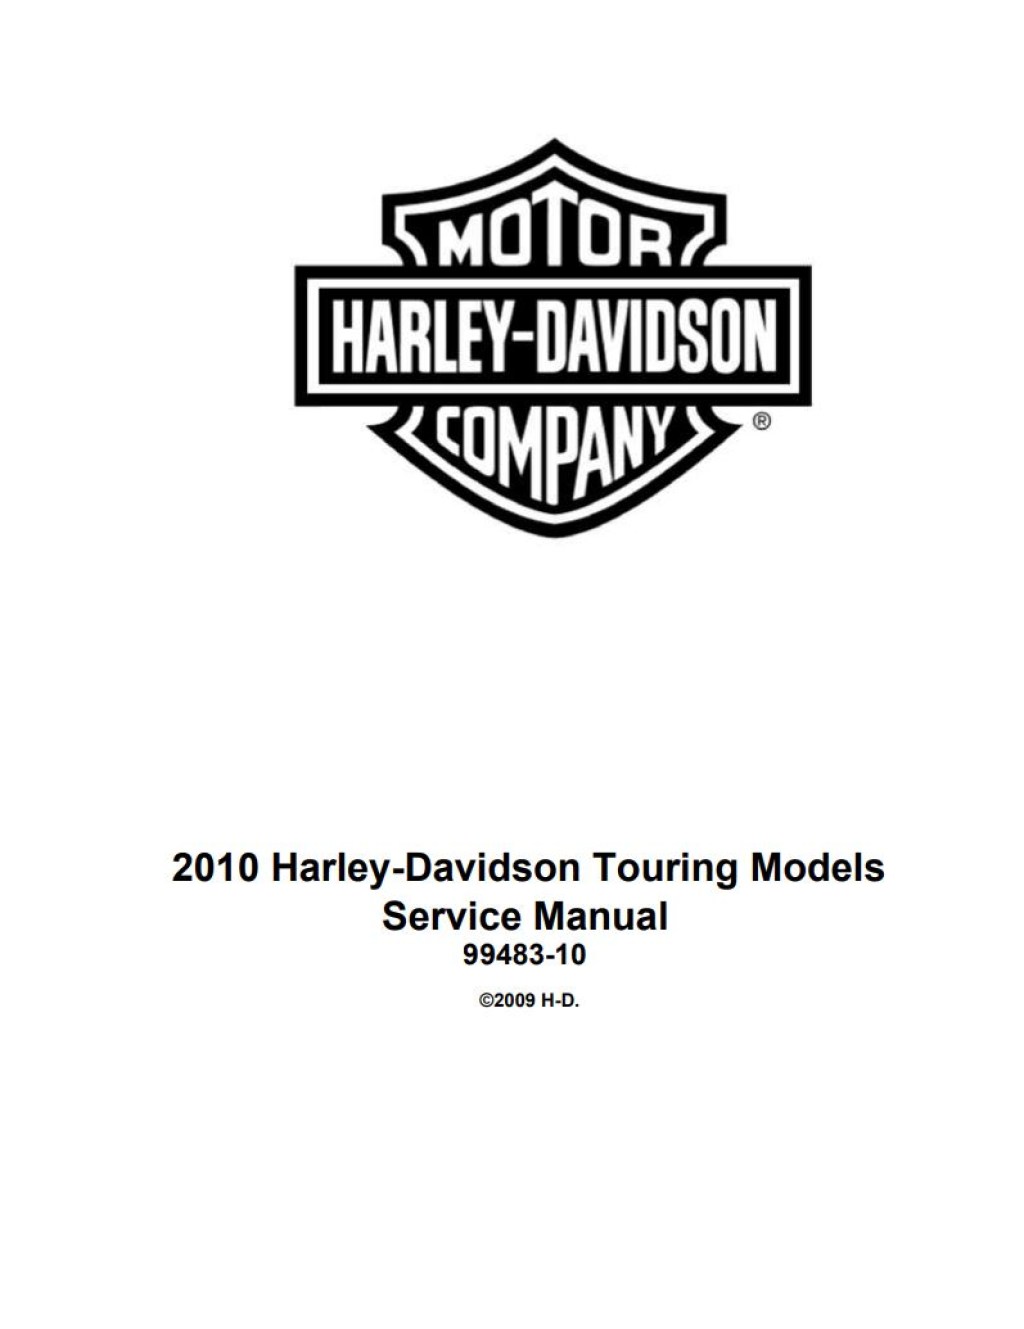 Picture of: Service manual  Harley-Davidson Touring Models, Electra Glide Classic,  Street Glide, Road King, Road Glide